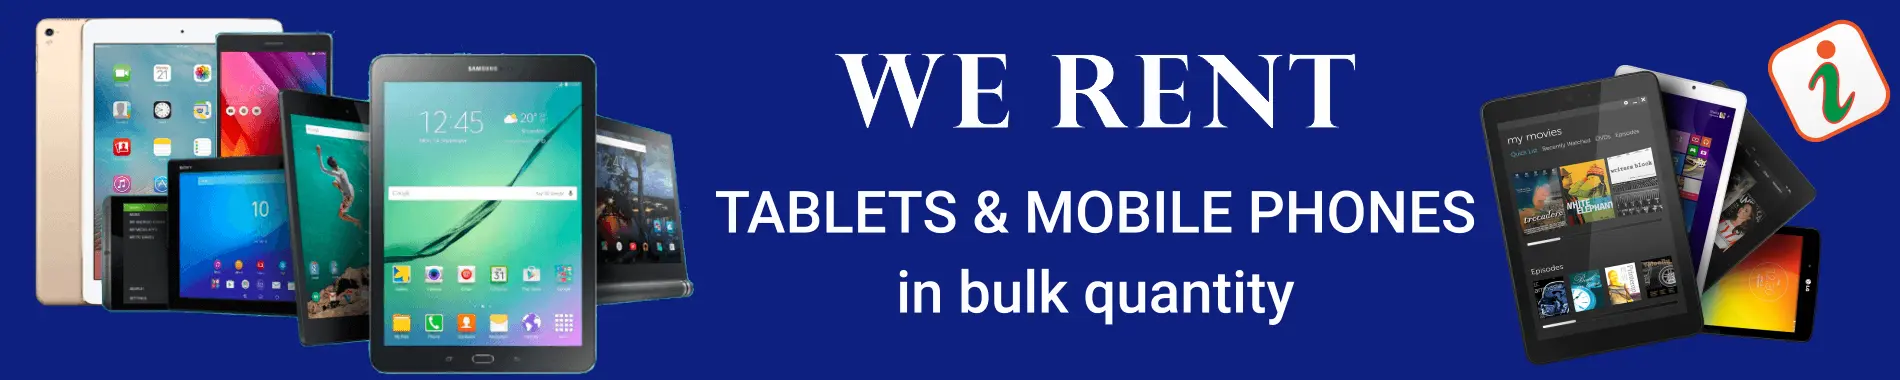 Mobile Phones and Tablets on Rent